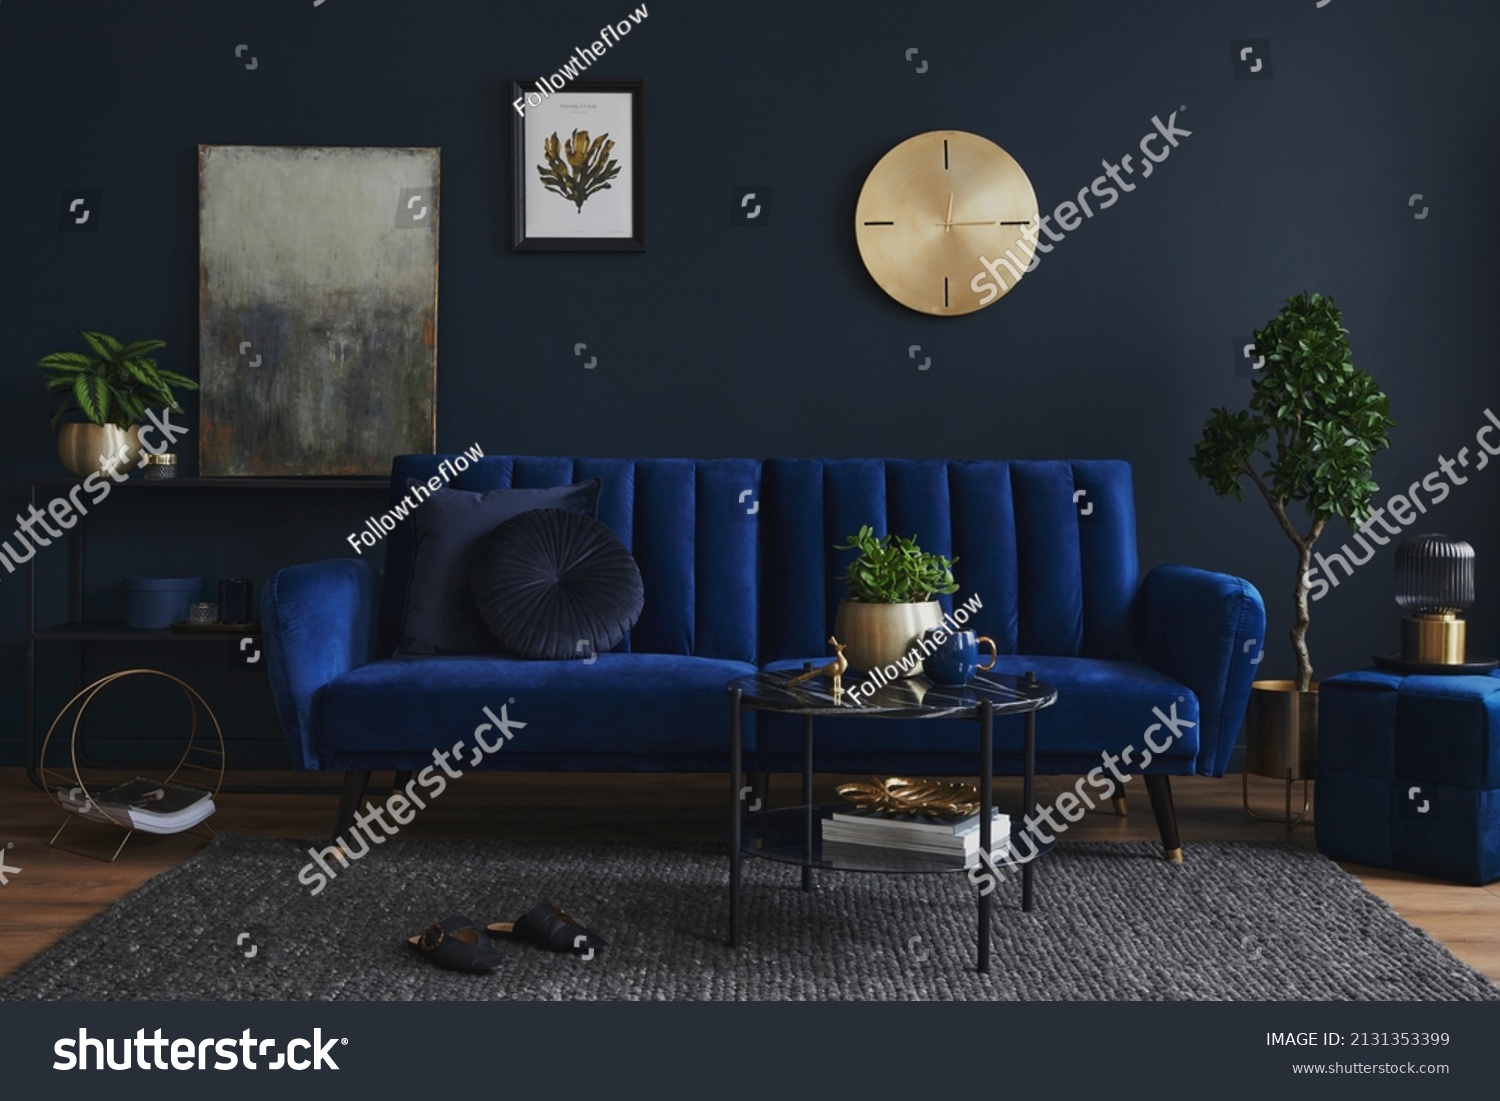 Creative compositon of modern living room interior design with glamour blue sofa, metal shelf, coffee table and elegant home accessories. Dark blue wall. Home staging. Template. Copy space. #2131353399